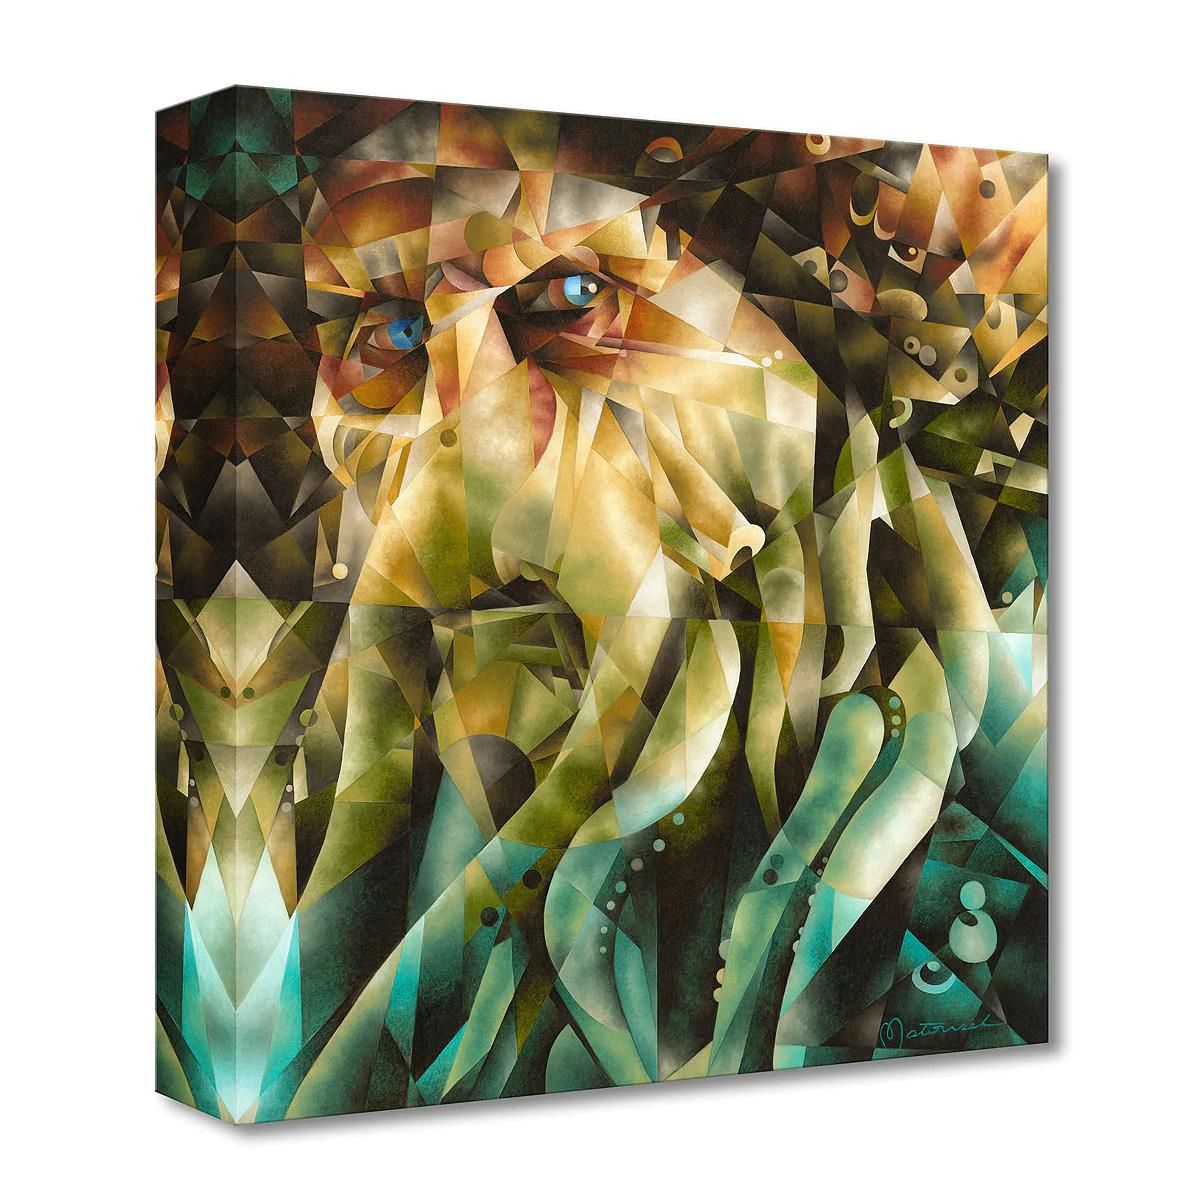 Portrait of Davy Jones - Gallery Wrapped Canvas